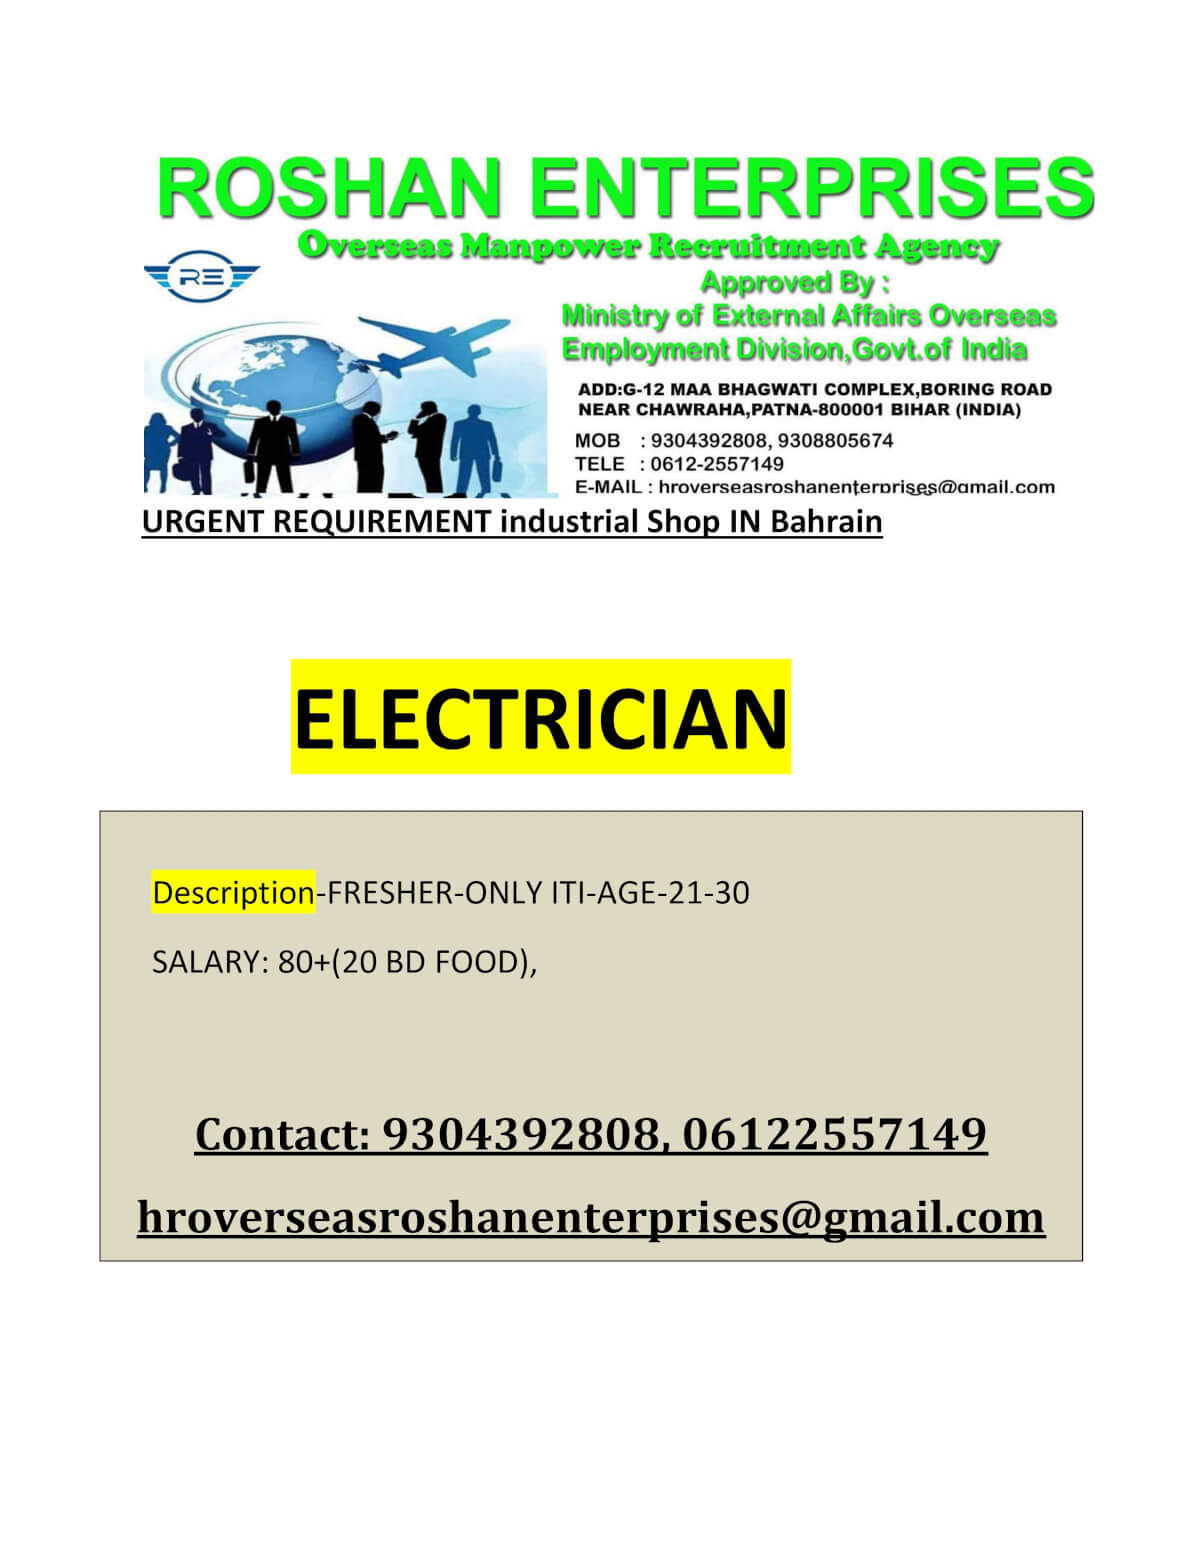 urgent requirement Electrician-for Bahrain